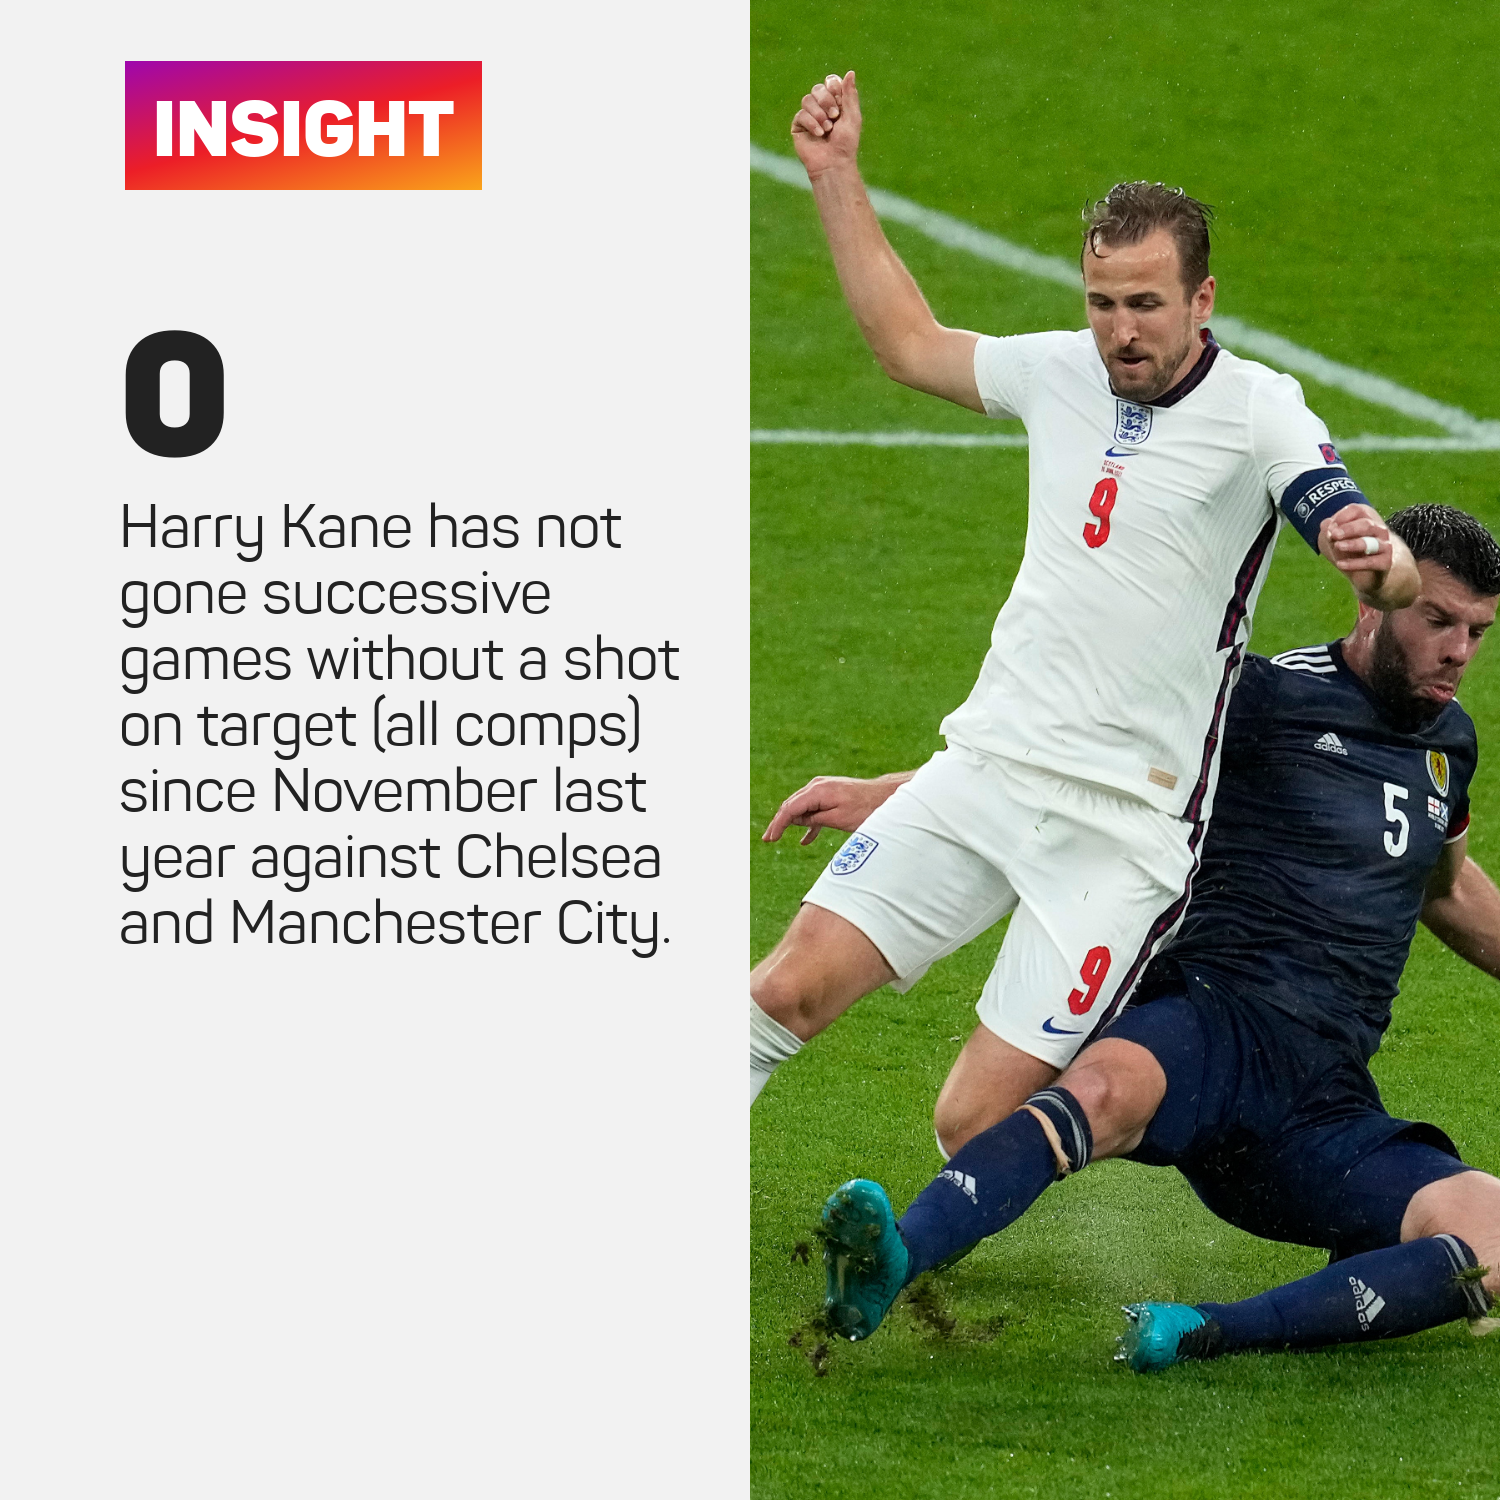 Kane didn't manage a shot on target against Scotland